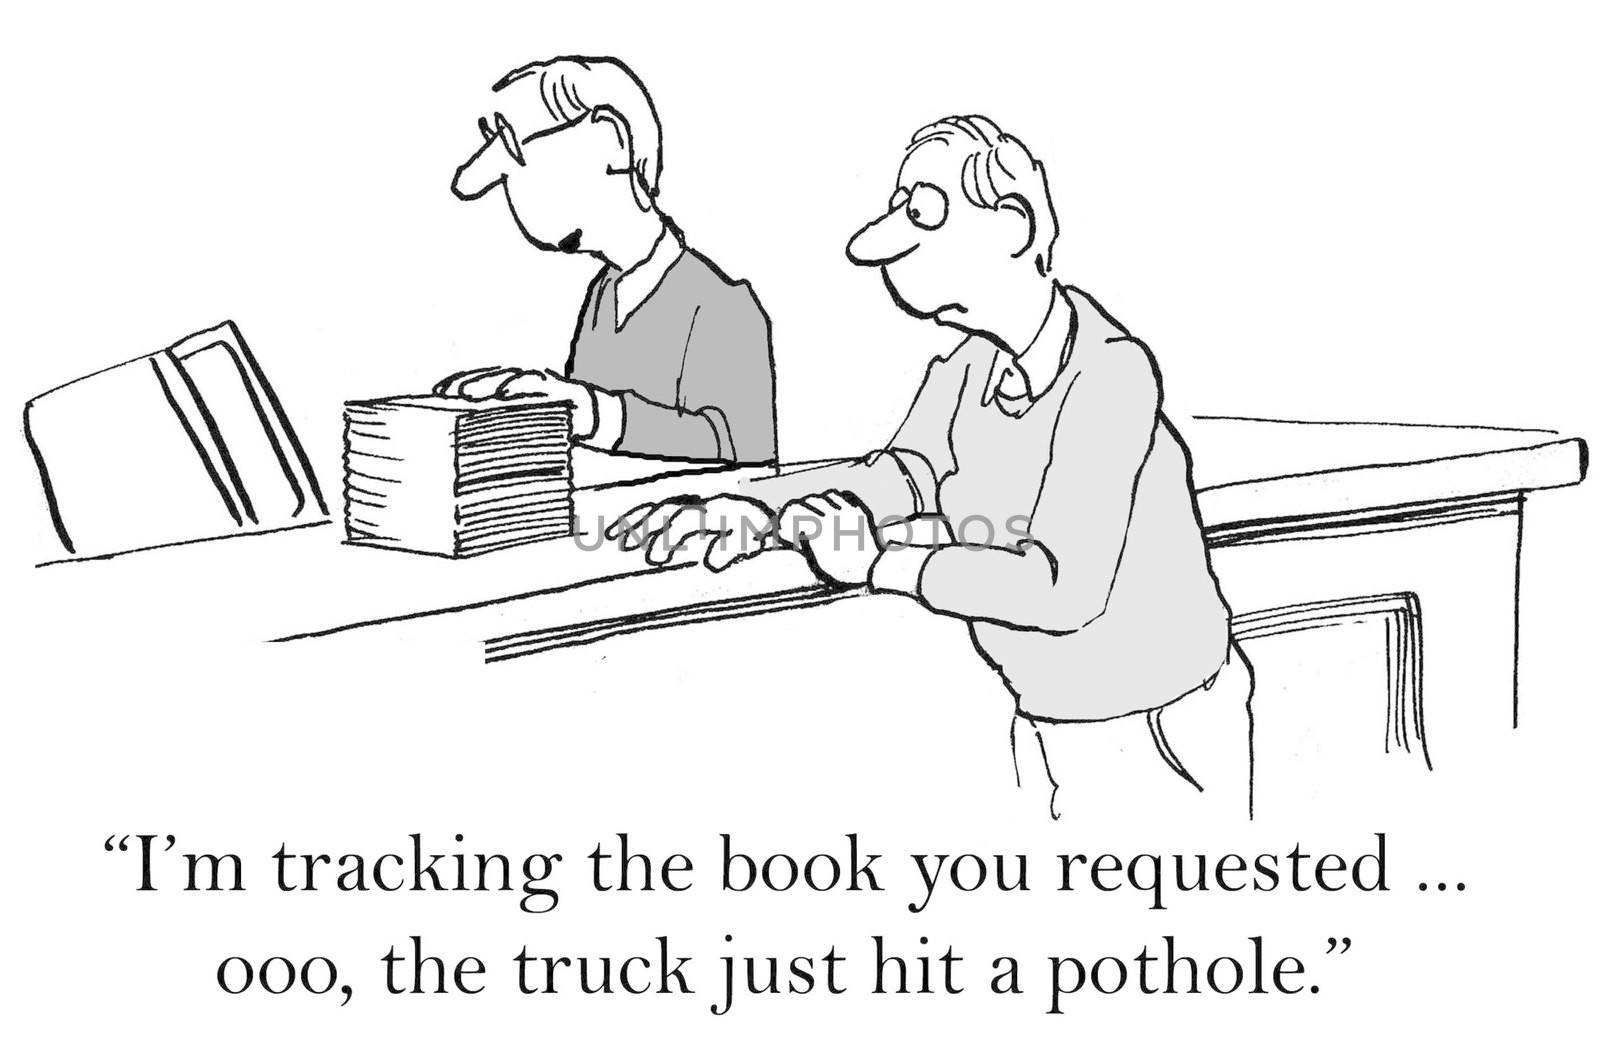 "I'm tracking the book you ordered ... ooo, the truck just hit a pothole."